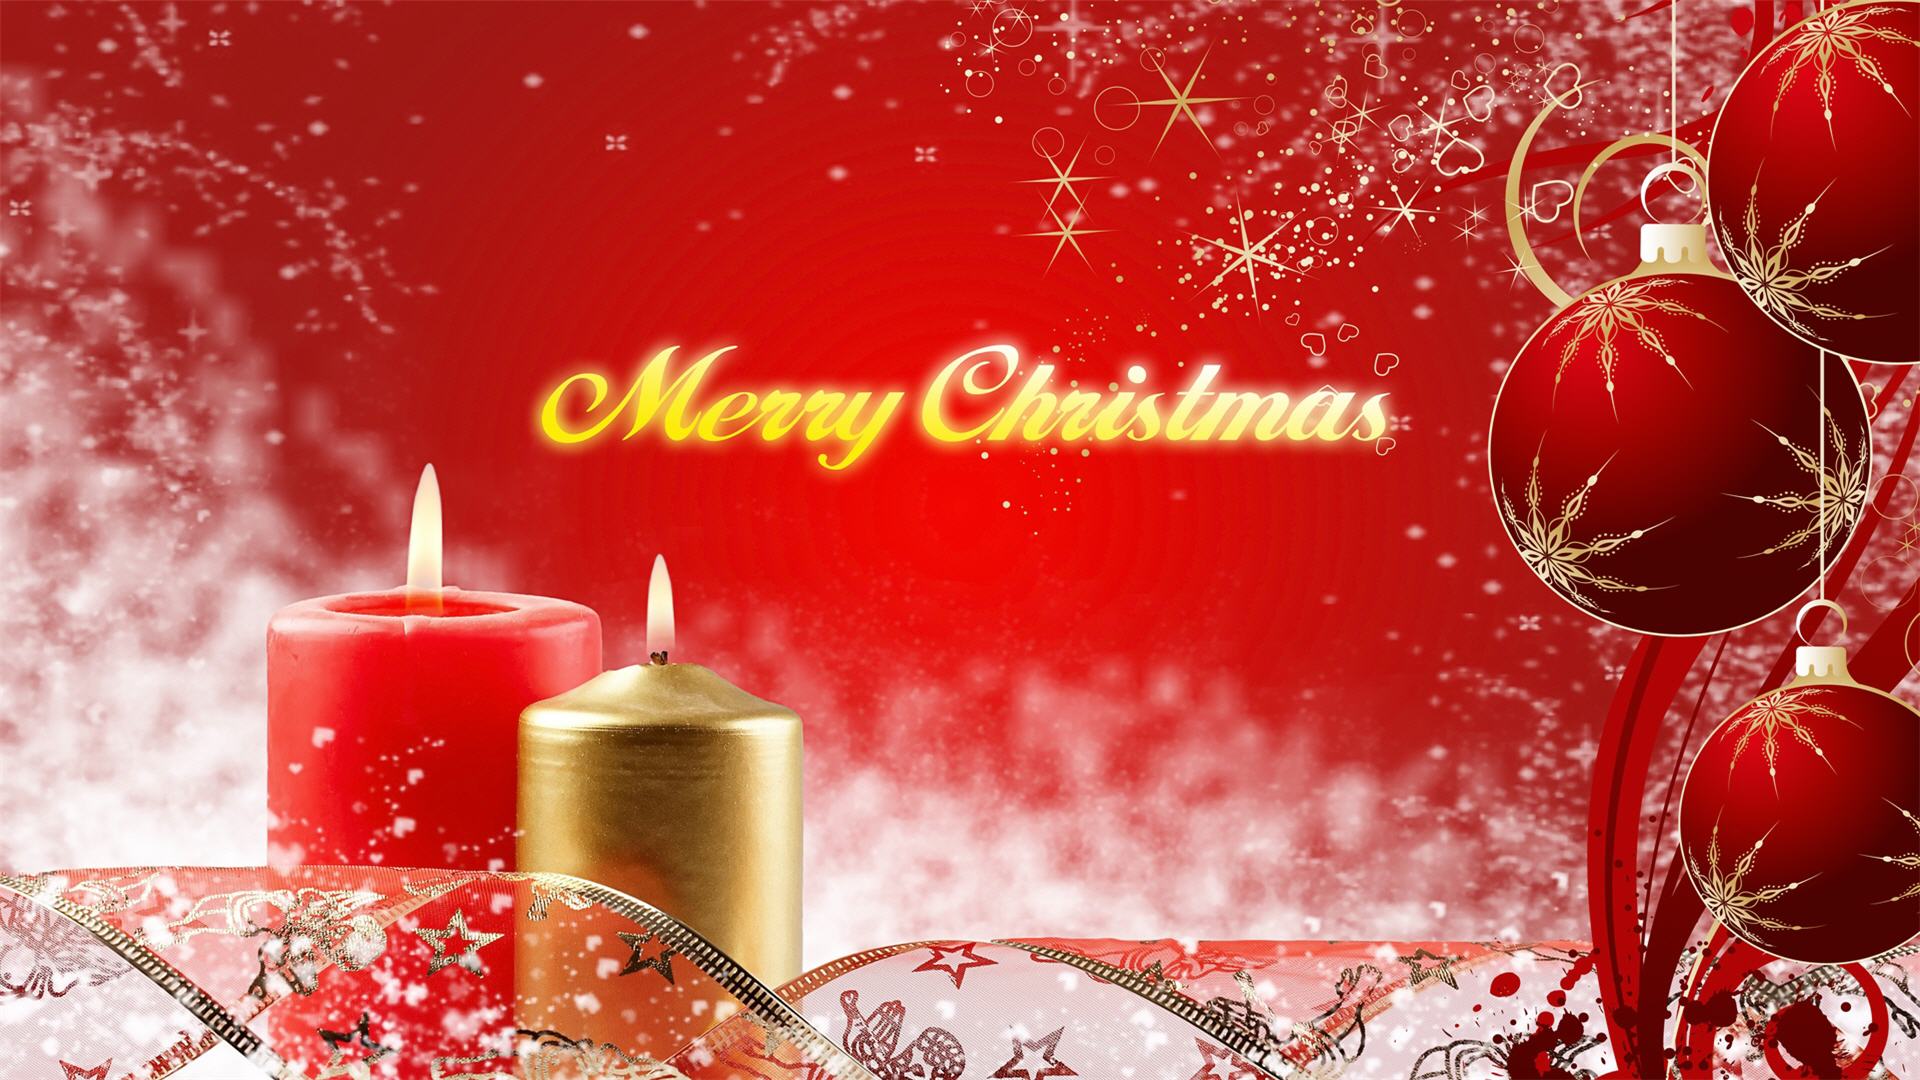 Merry Christmas Candle Beautiful Desktop Background